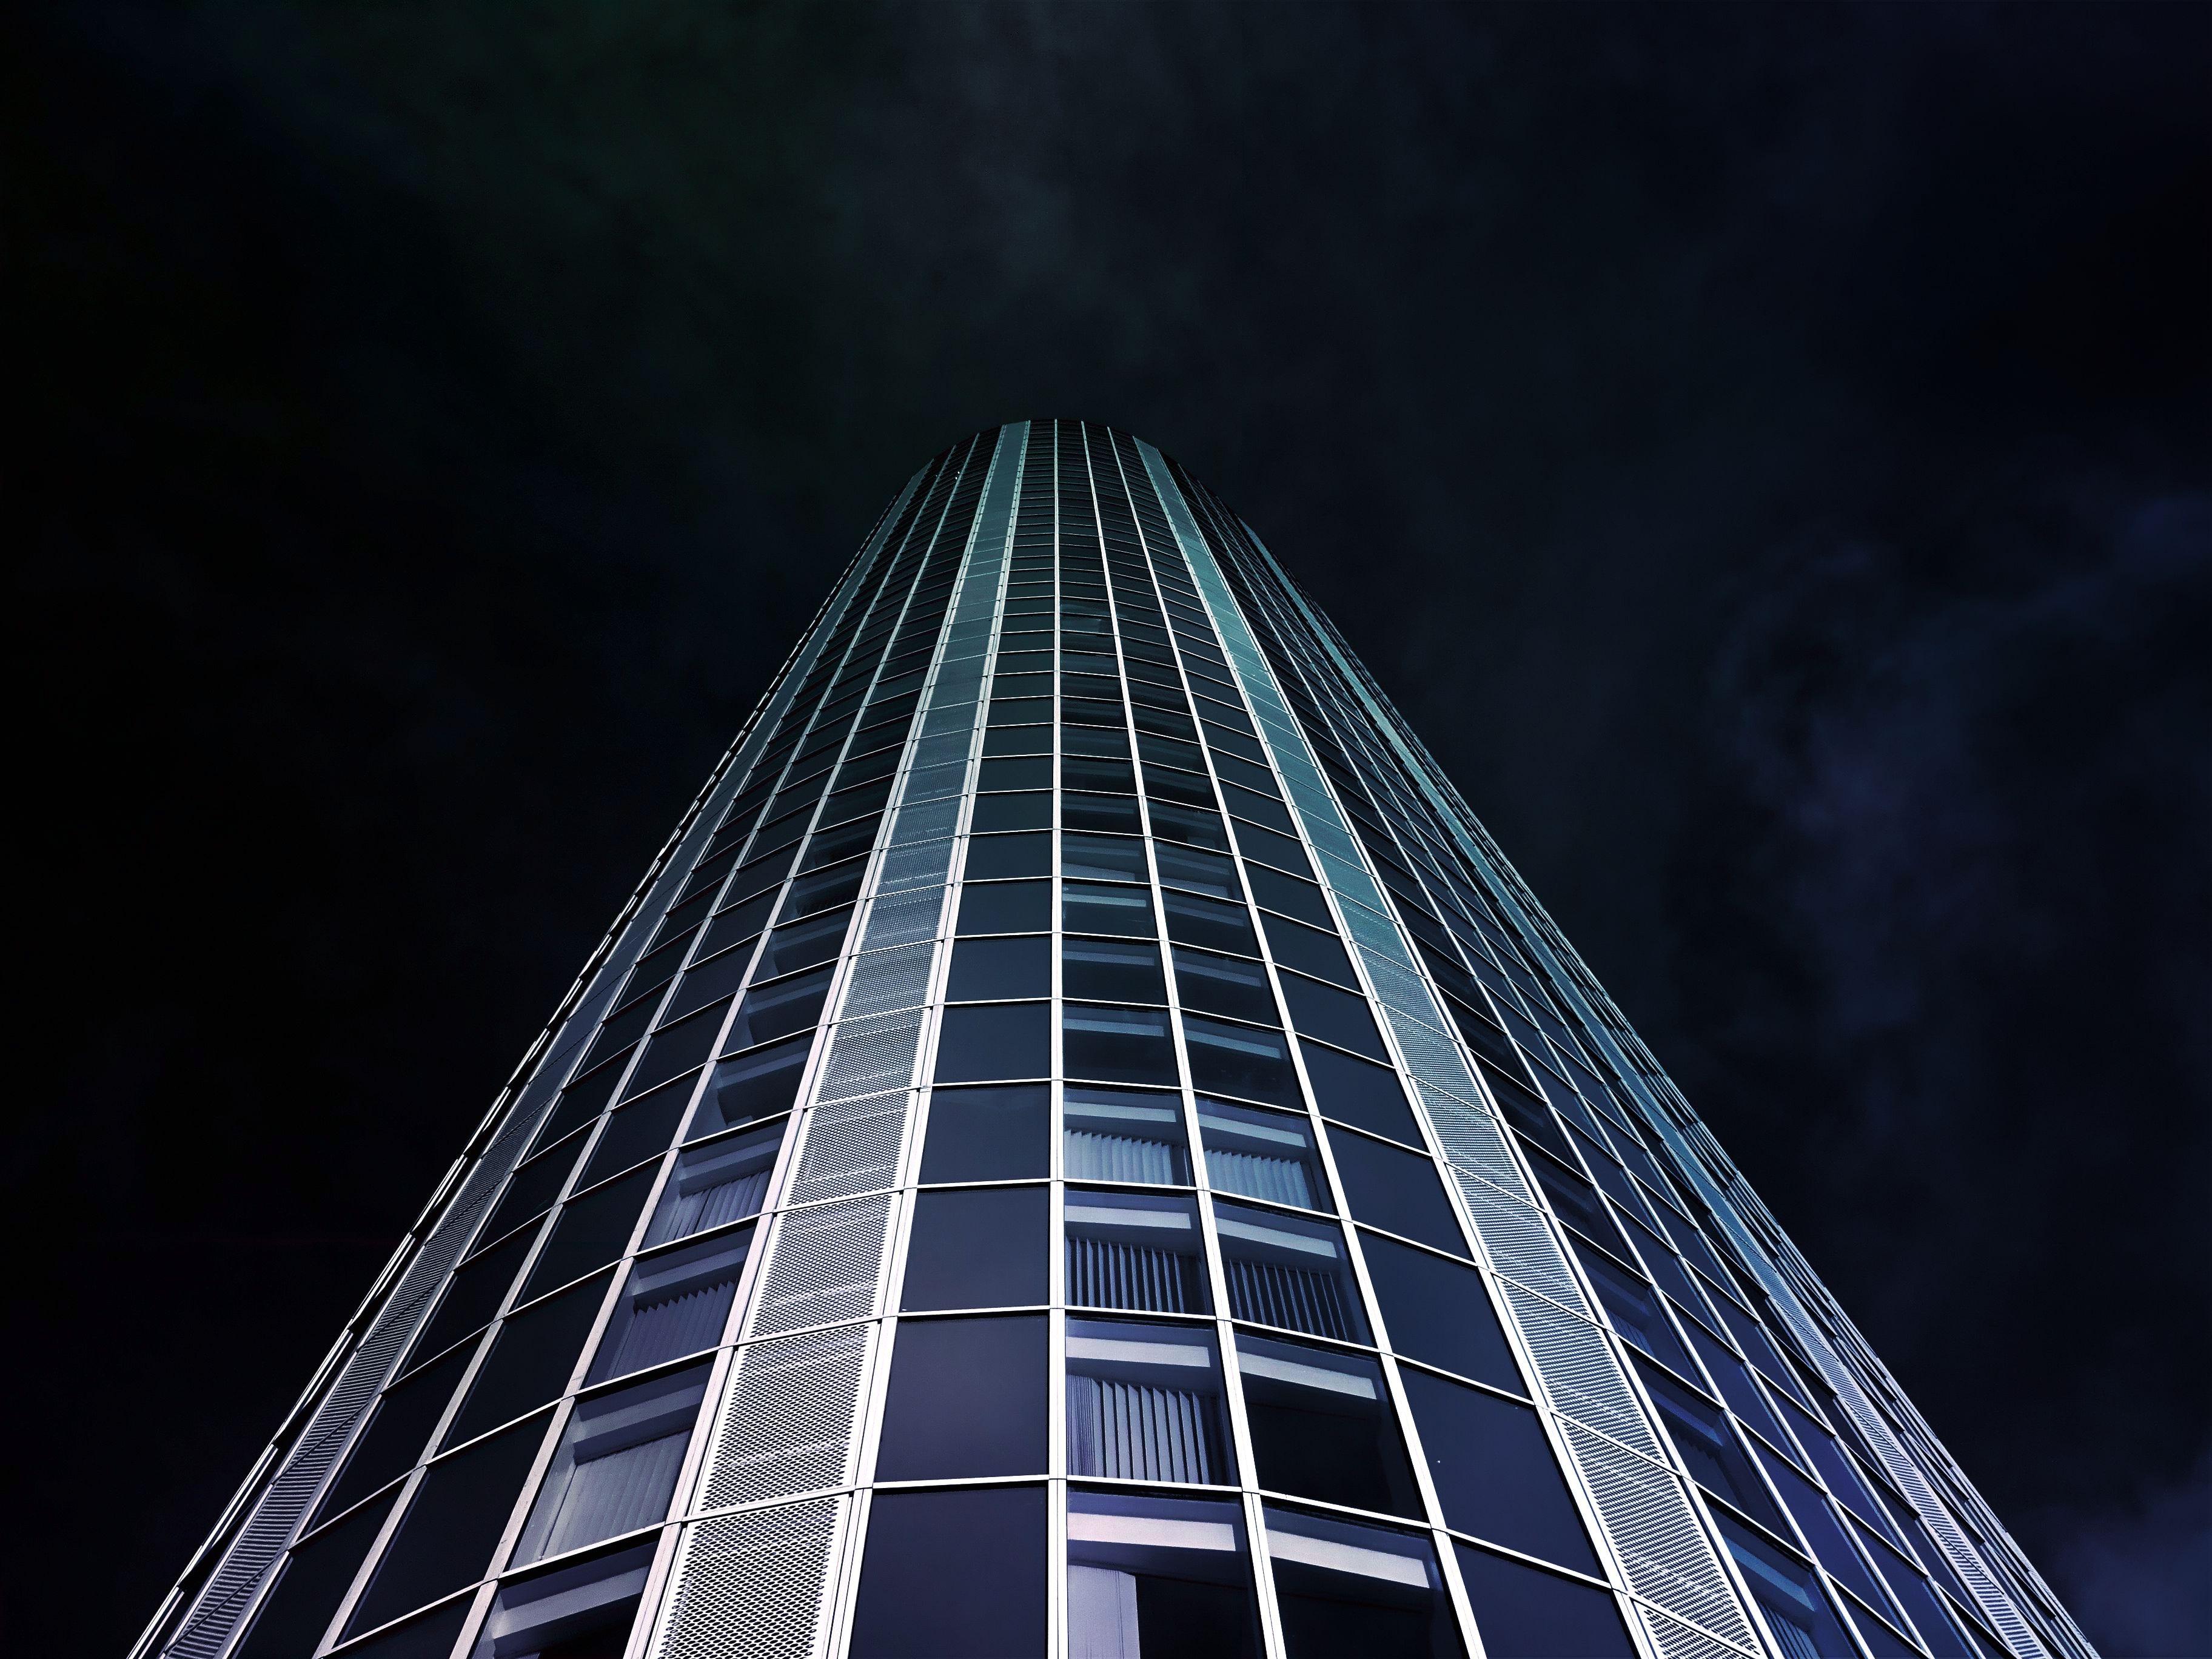 Worm's eye view of high-rise building during nighttime photo